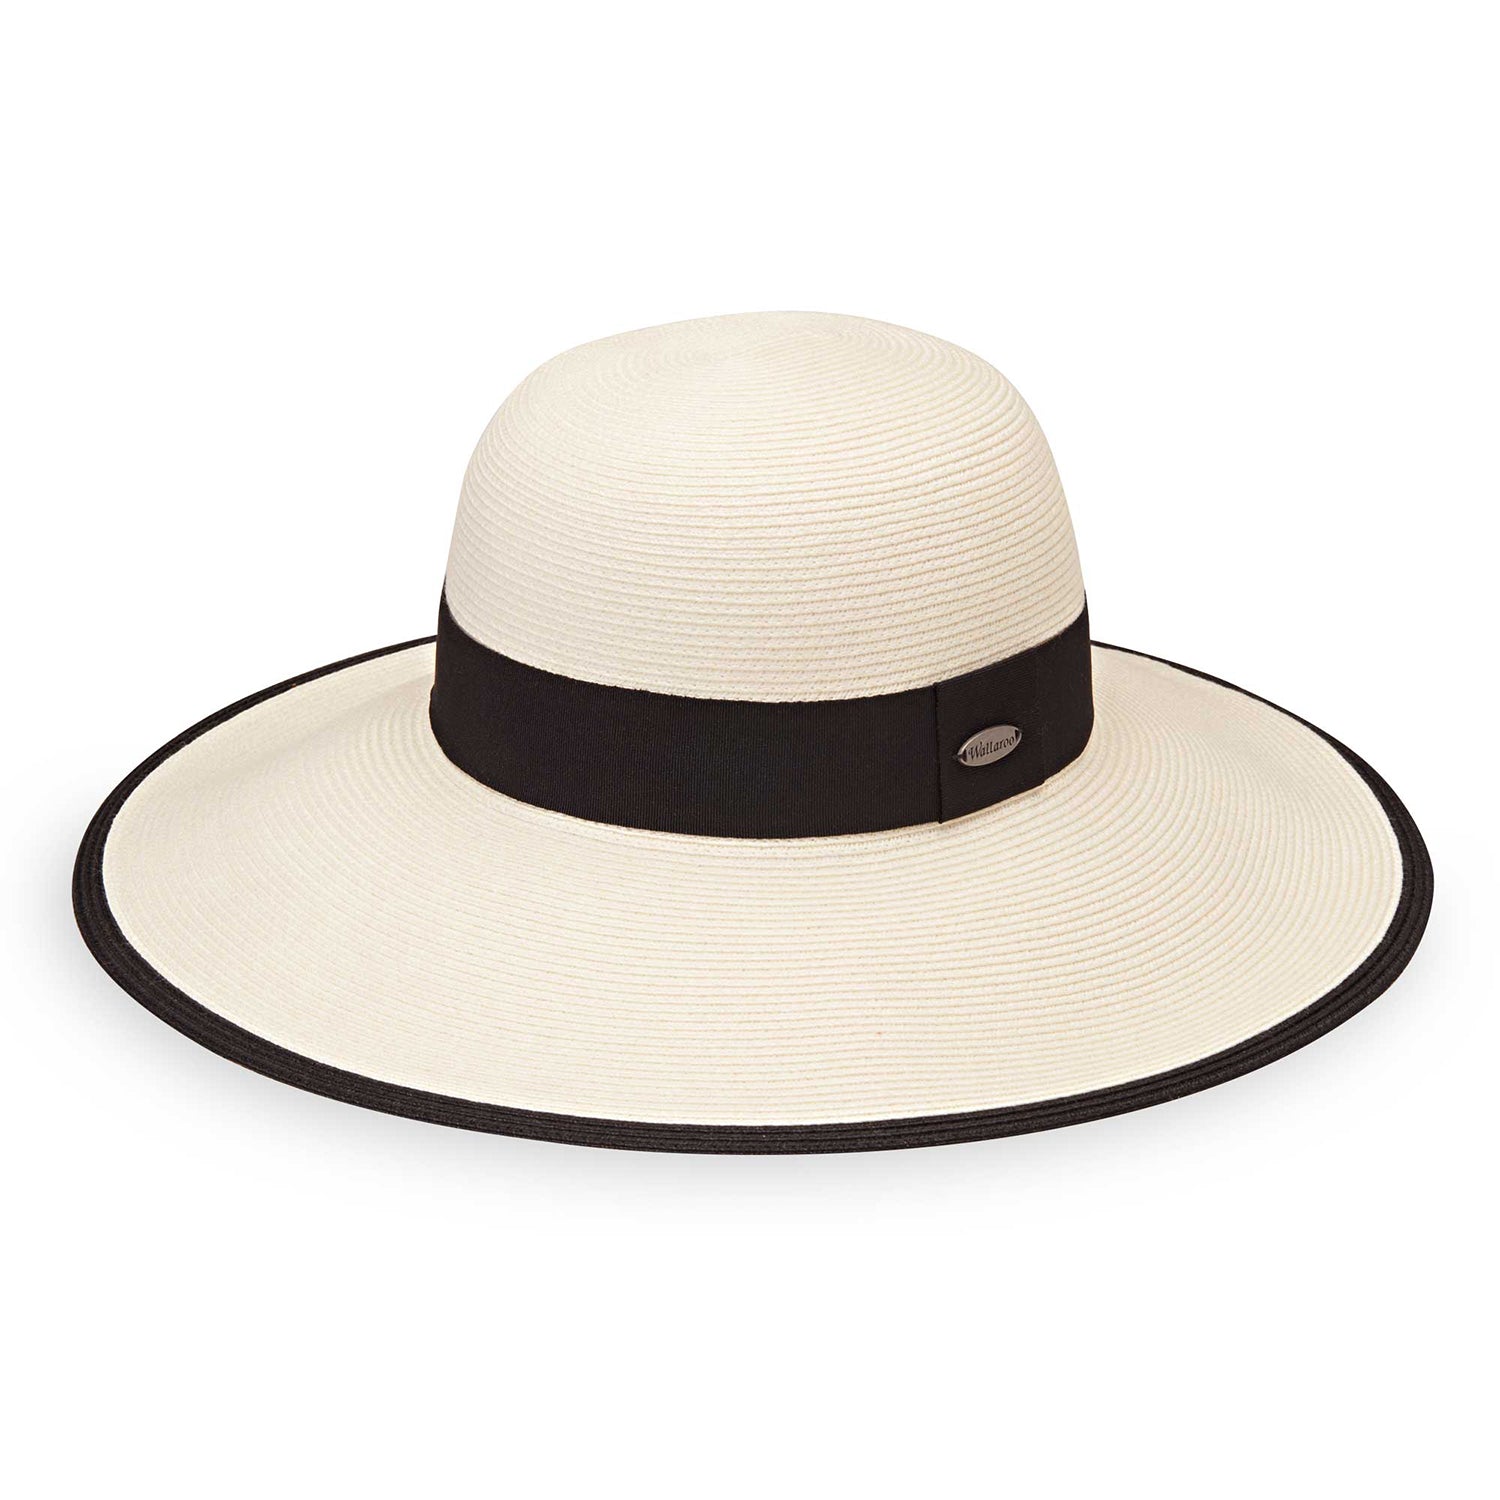 Featuring Margot big wide brim style sun hat, and is packable for travel by Wallaroo